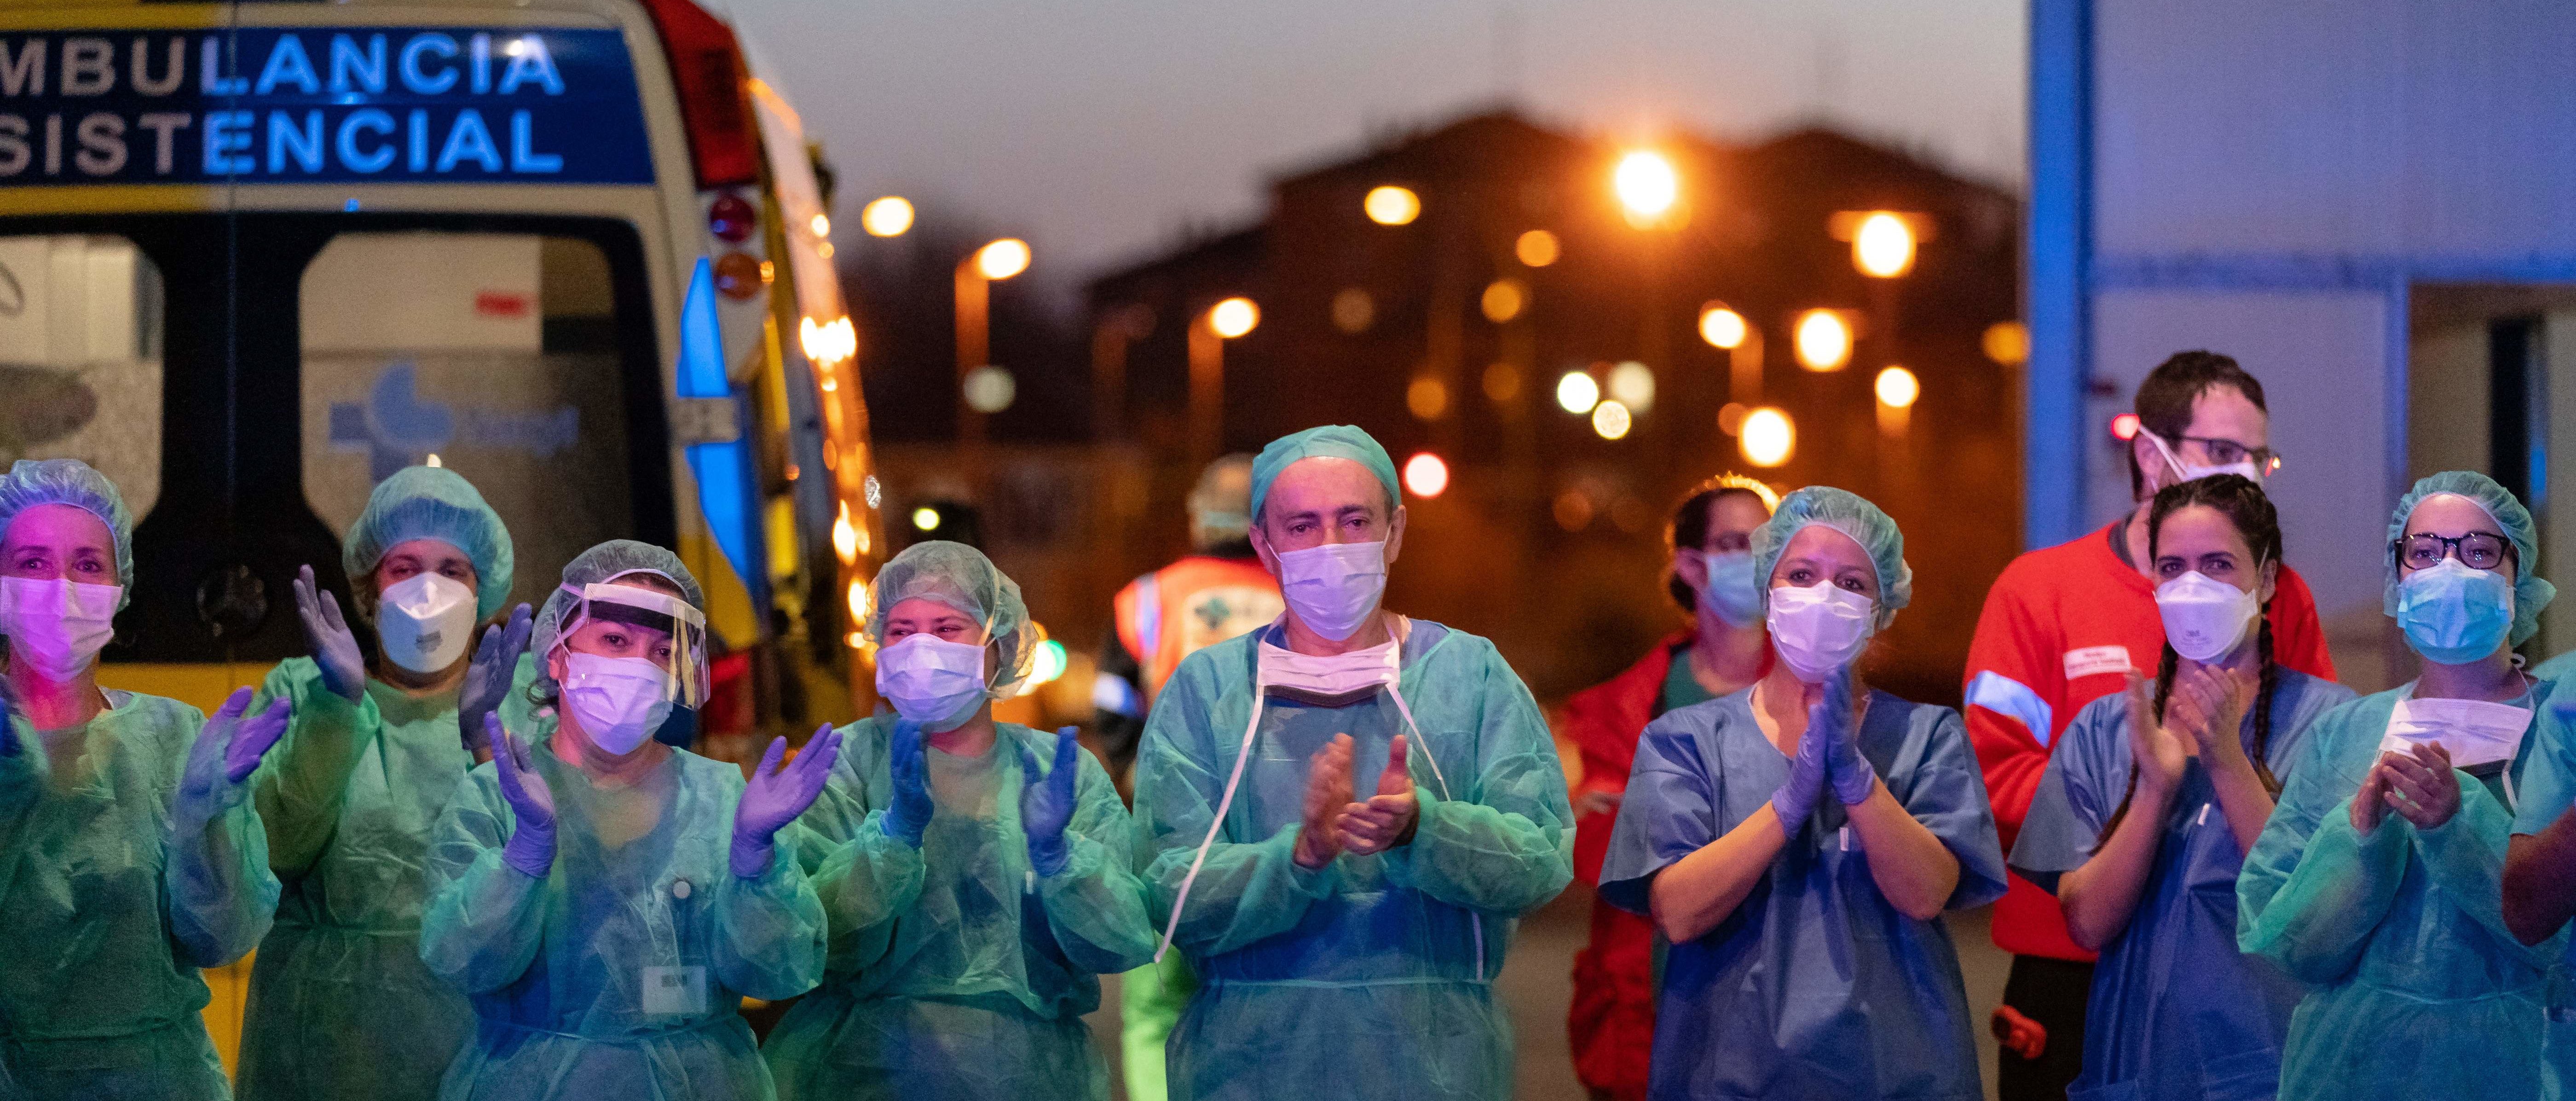 Healthcare workers dealing with the new coronavirus crisis applaud in return as they are cheered on by people outside the Burgos general hospital in Burgos on March 25, 2020. - (Photo by CESAR MANSO/AFP via Getty Images)